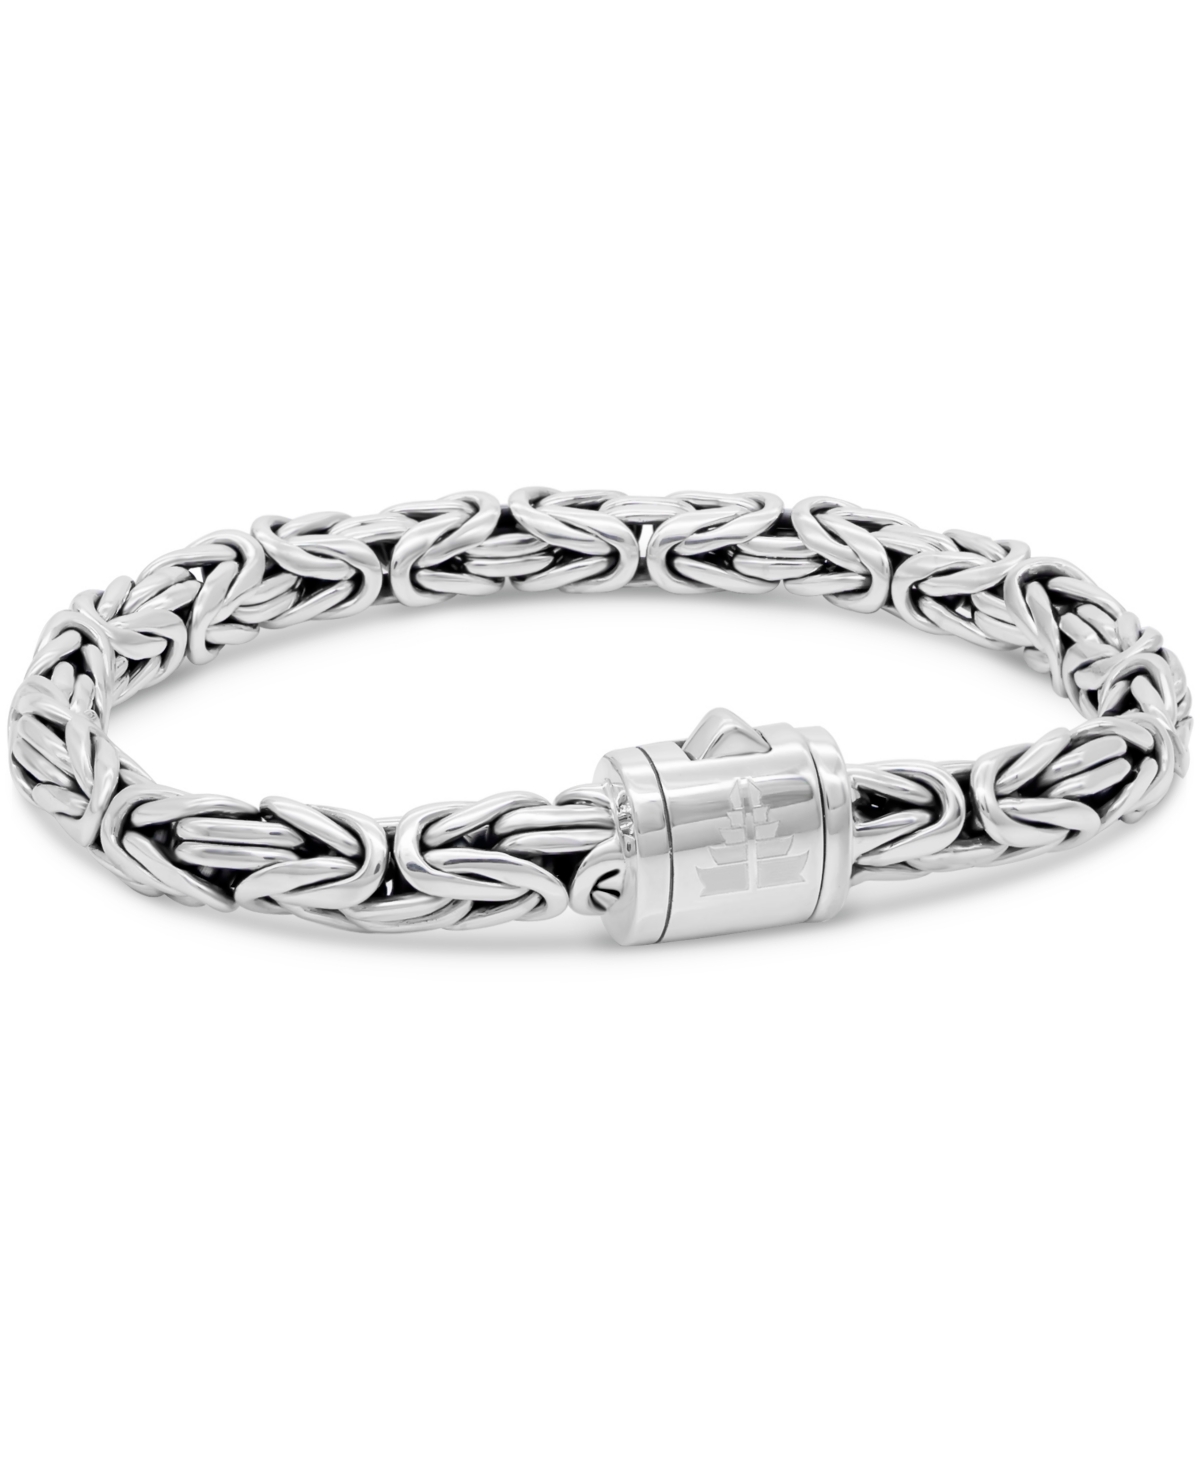 Borobudur Oval 7mm Chain Bracelet in Sterling Silver - Silver